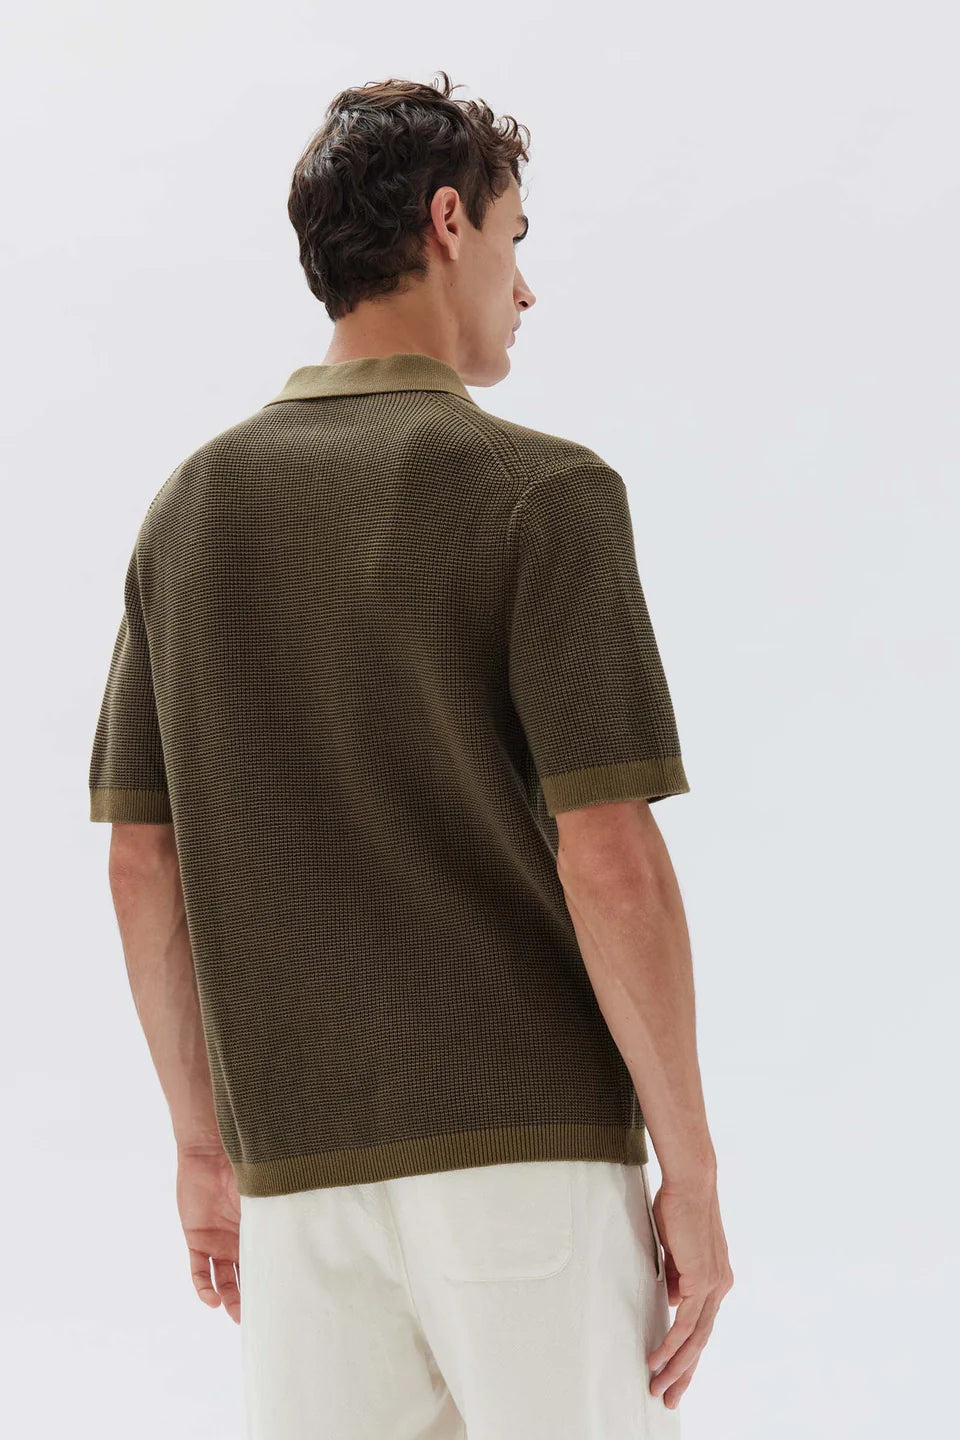 Lorne Knit SS Polo | Pea / Olive